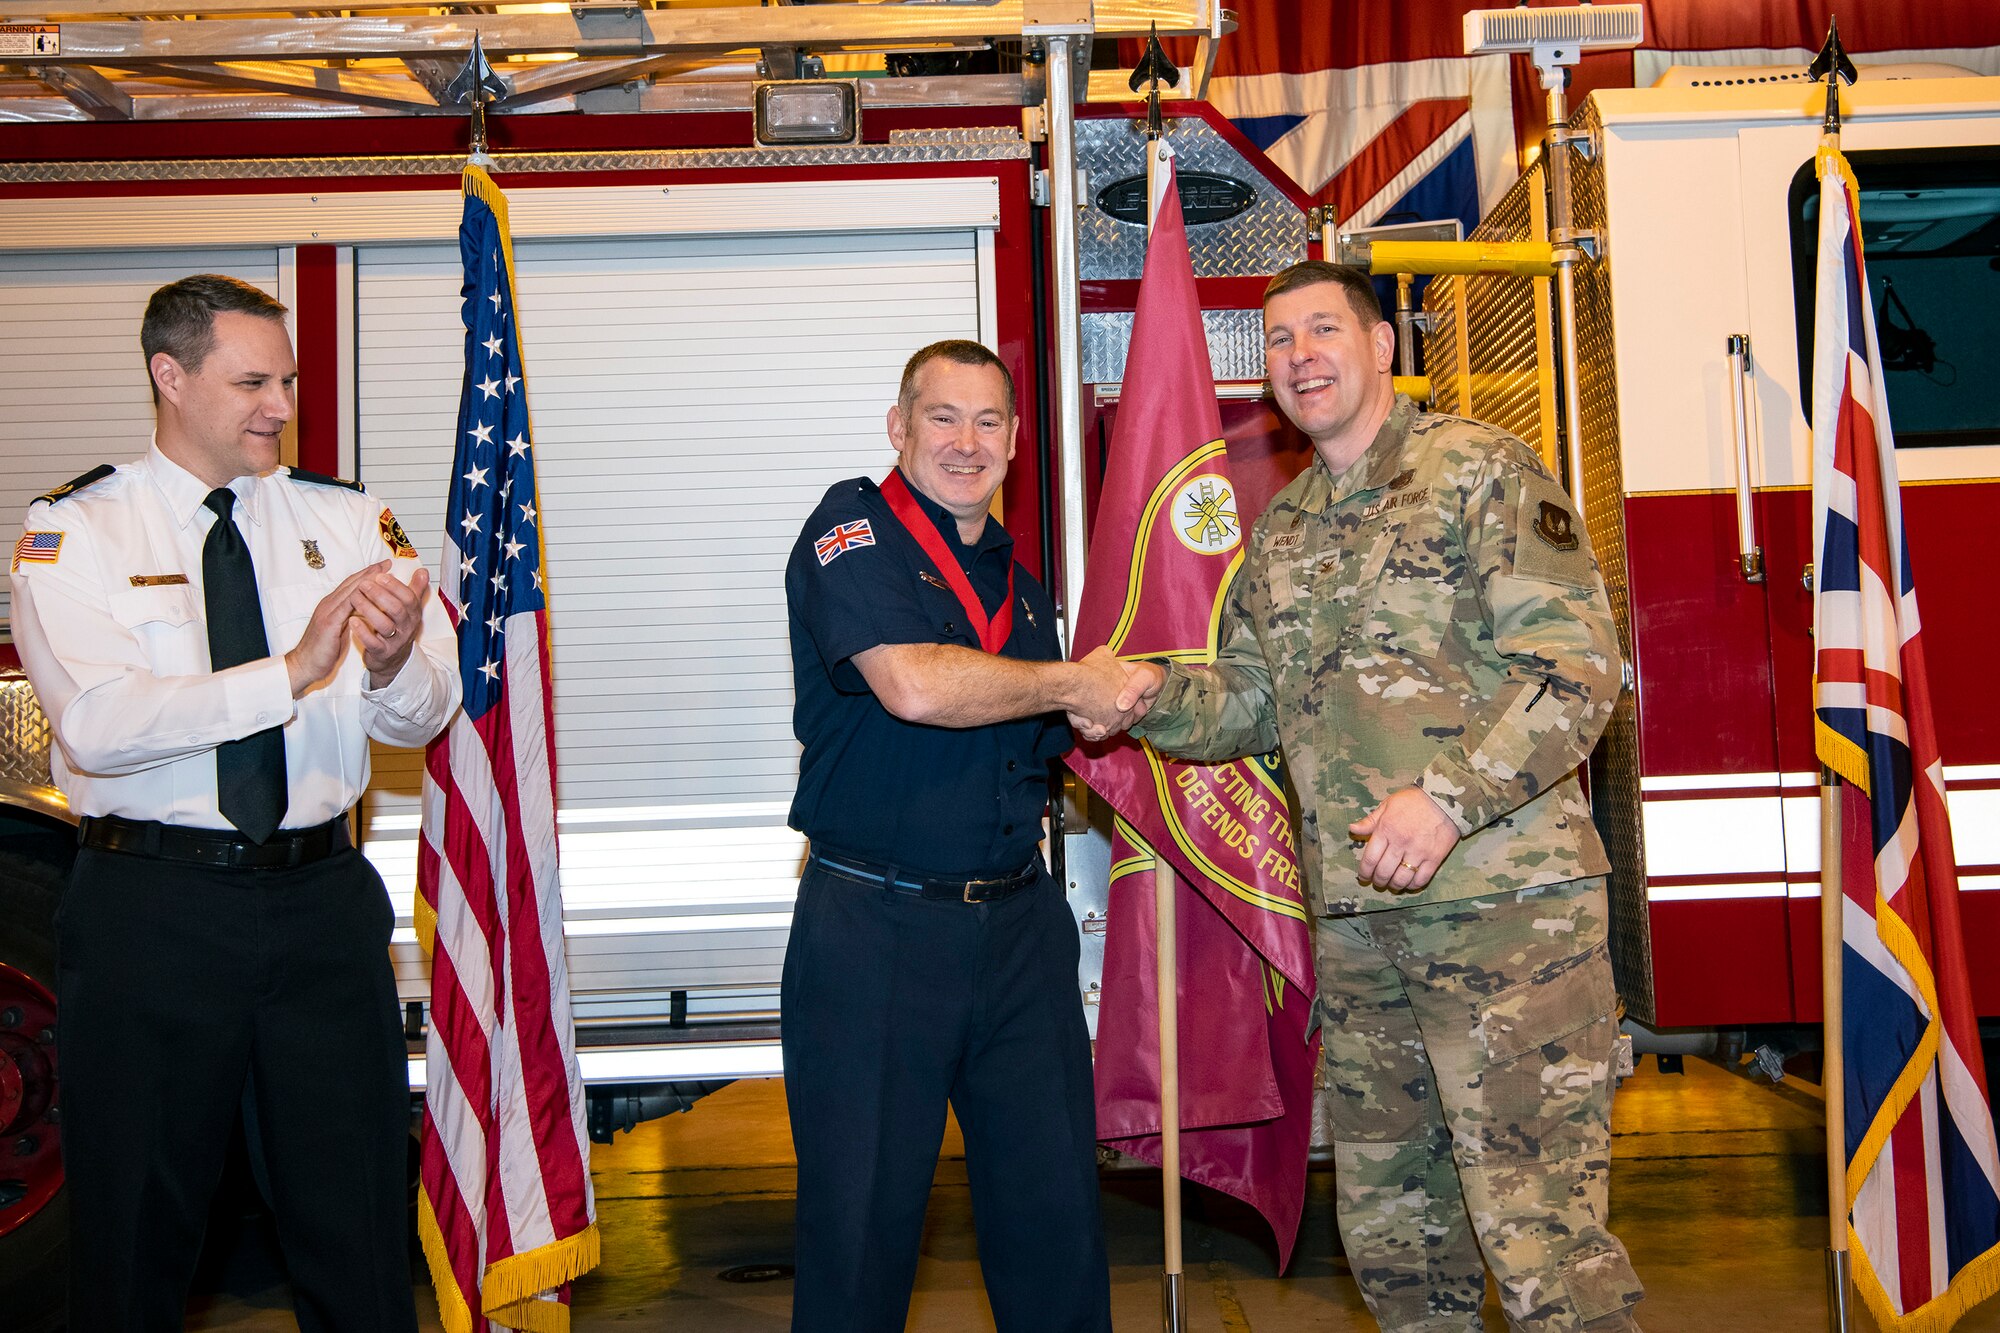 Robert Smith, center, 423rd Civil Engineer Squadron firefighter, receives a coin from Col. Kurt Went, 501st Combat Support Wing commander at RAF Alconbury, Dec. 20, 2019. Smith was recognized for exemplary lifesaving abilities under extreme pressure and clarity of mind for actions performed on August 21st. Smith administered CPR to his wife Karen for 17 minutes until paramedics arrived at his home. (U.S. Air Force photo by Senior Airman Eugene Oliver)